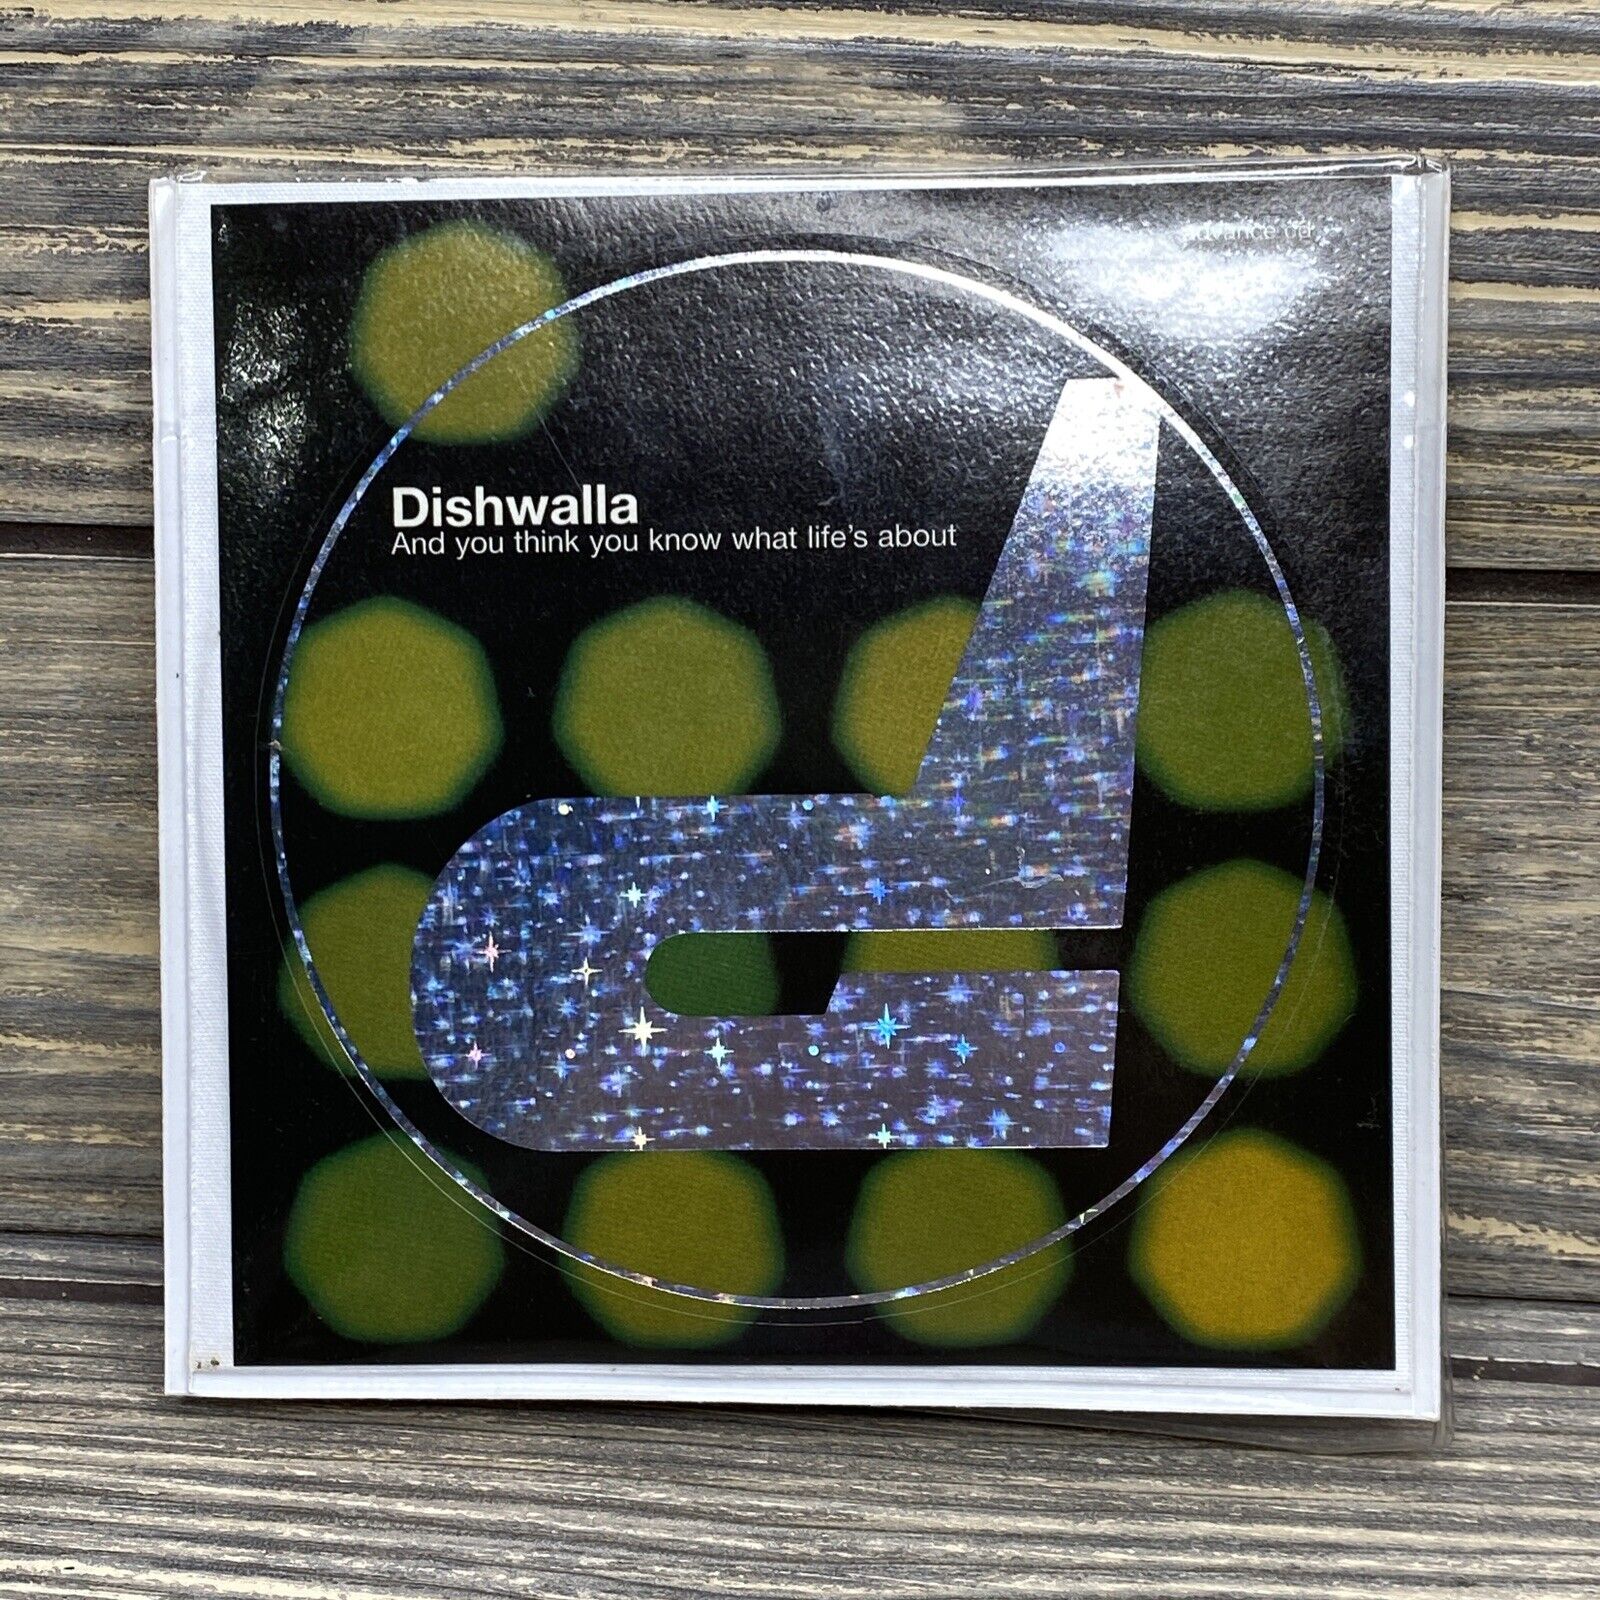 Vintage Promotional CD Dishwalla And You Think You Know What Life‘S About 1998 ￼